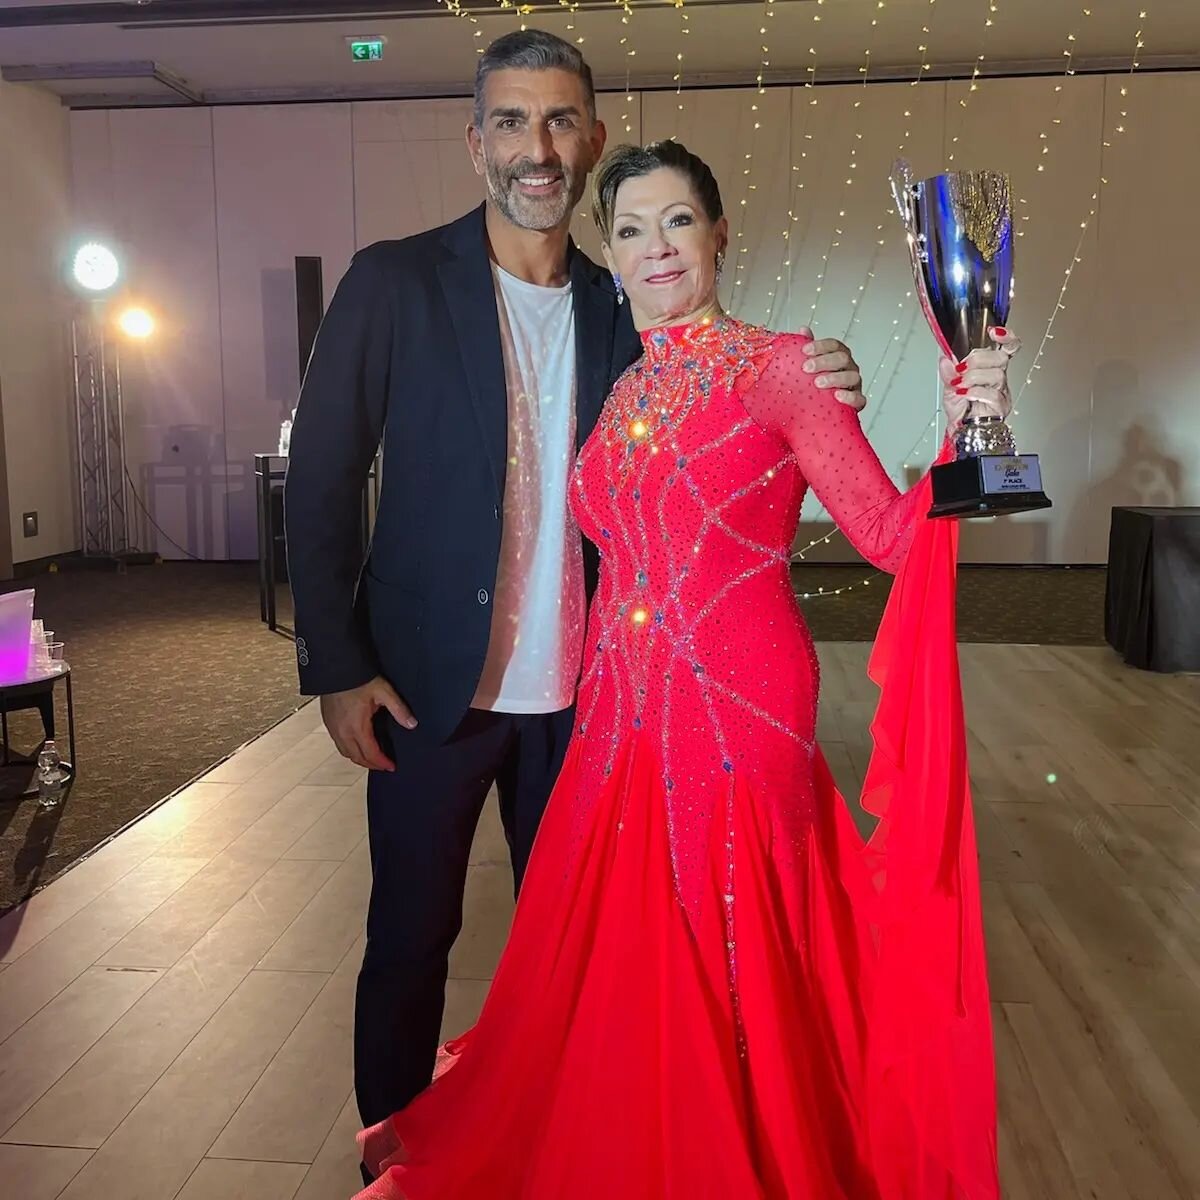 The Oceans Dance Team continues to take Europe by storm! Christine Schneider Downs with guest instructor Samuele Pugliese took 1st place in their scholarship and multi-dance challenge event as well as 26 single dances at this past weekend's Pro-Am Ex